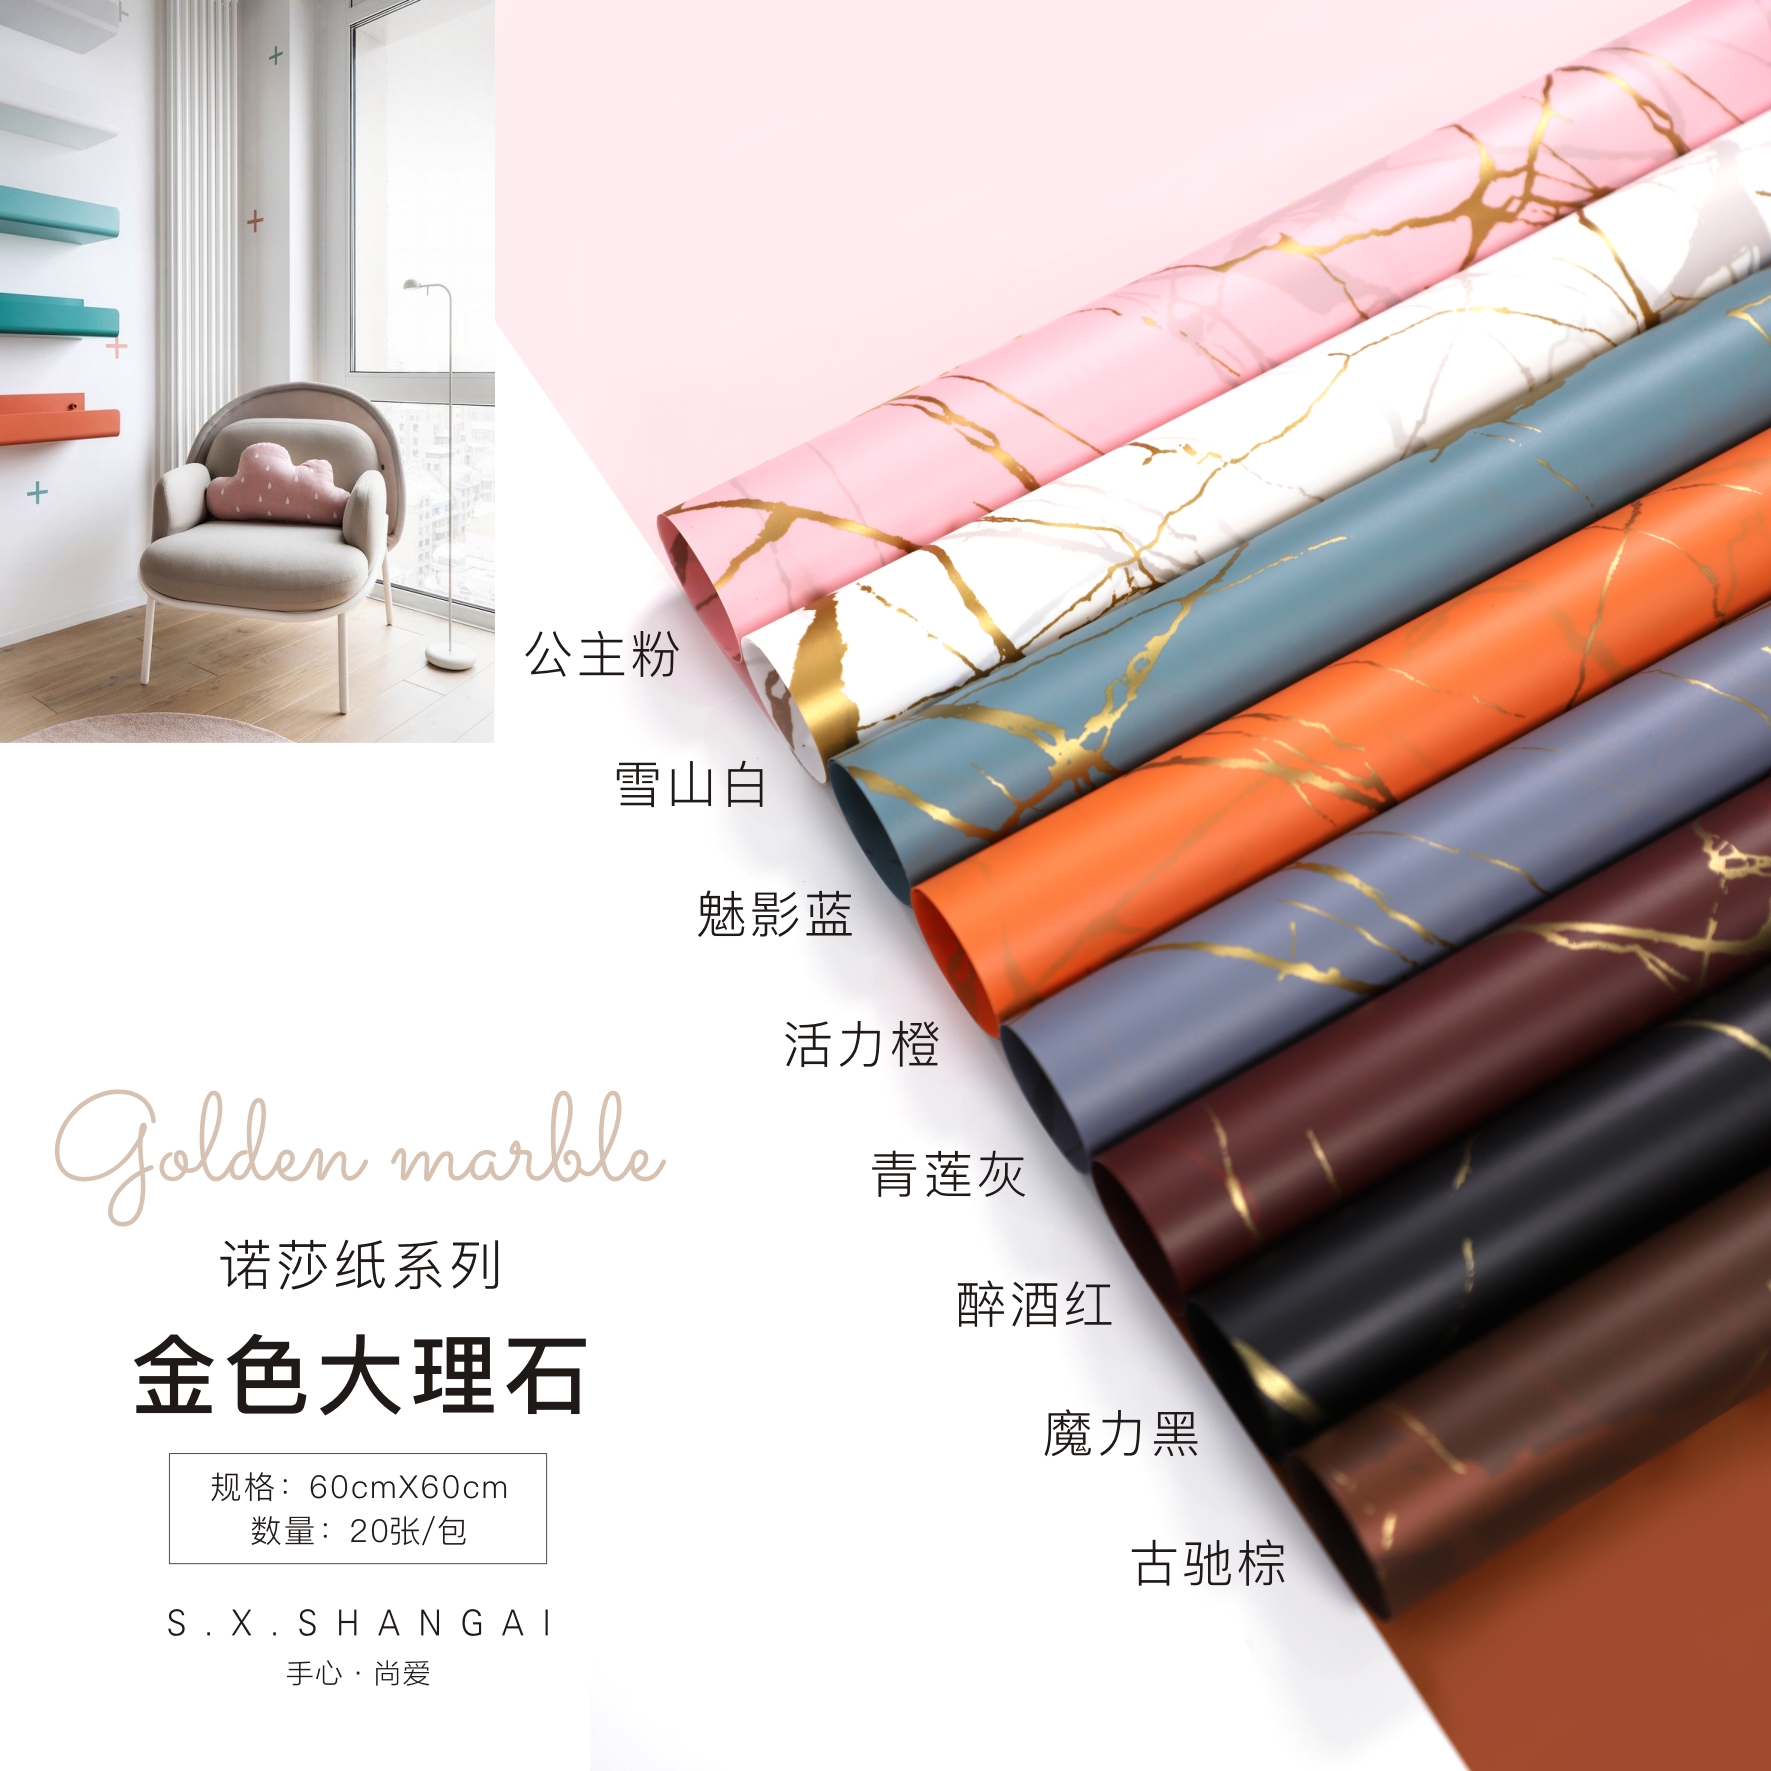 Hot sales PVC film waterproof film with fashionable golden marble pattern for flower wrapping paper for sheet Manufacturers, Hot sales PVC film waterproof film with fashionable golden marble pattern for flower wrapping paper for sheet Factory, Supply Hot sales PVC film waterproof film with fashionable golden marble pattern for flower wrapping paper for sheet